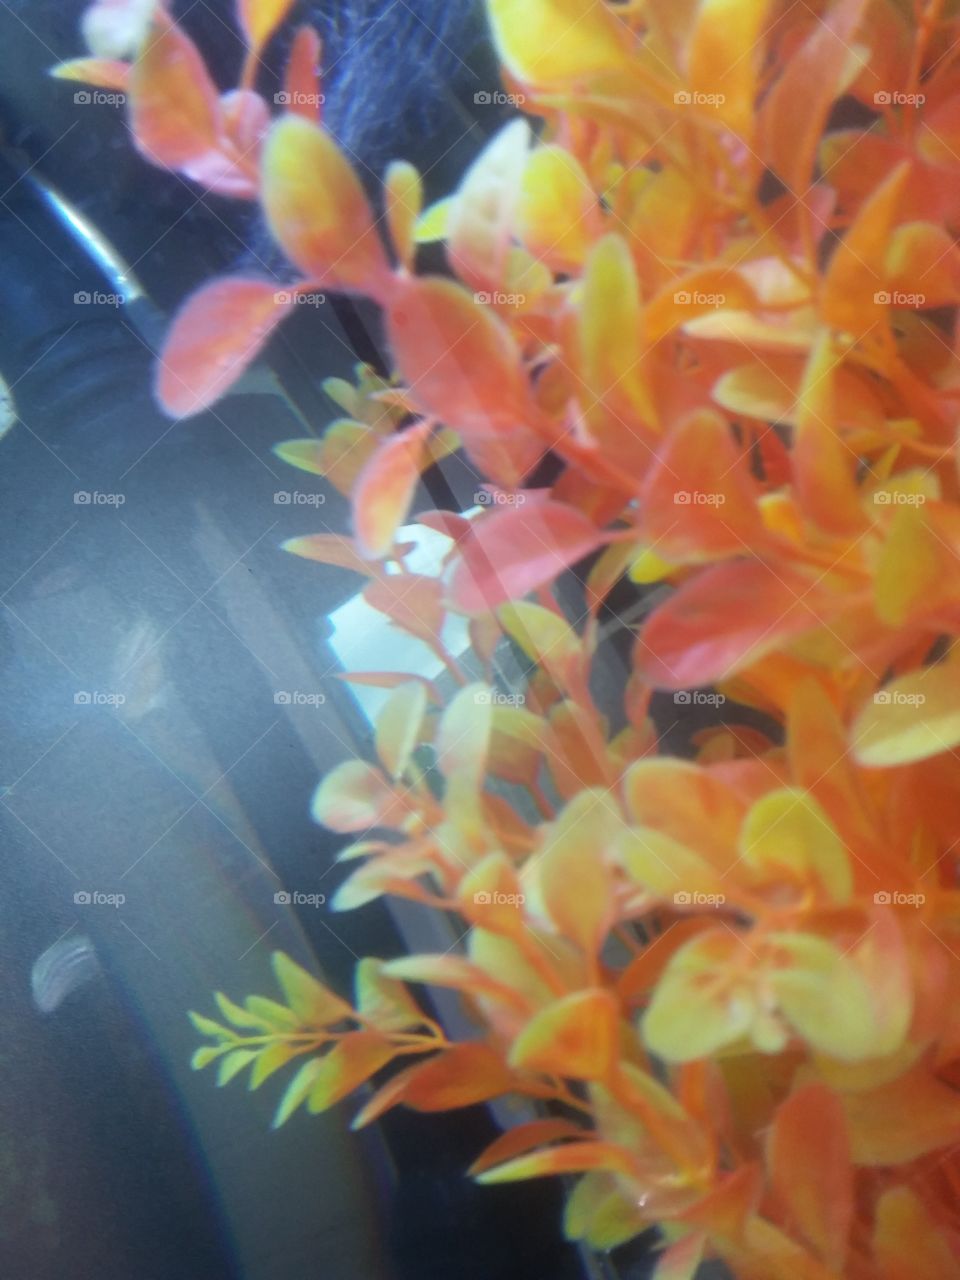 A picture of fish i a tank having a great time😀😊